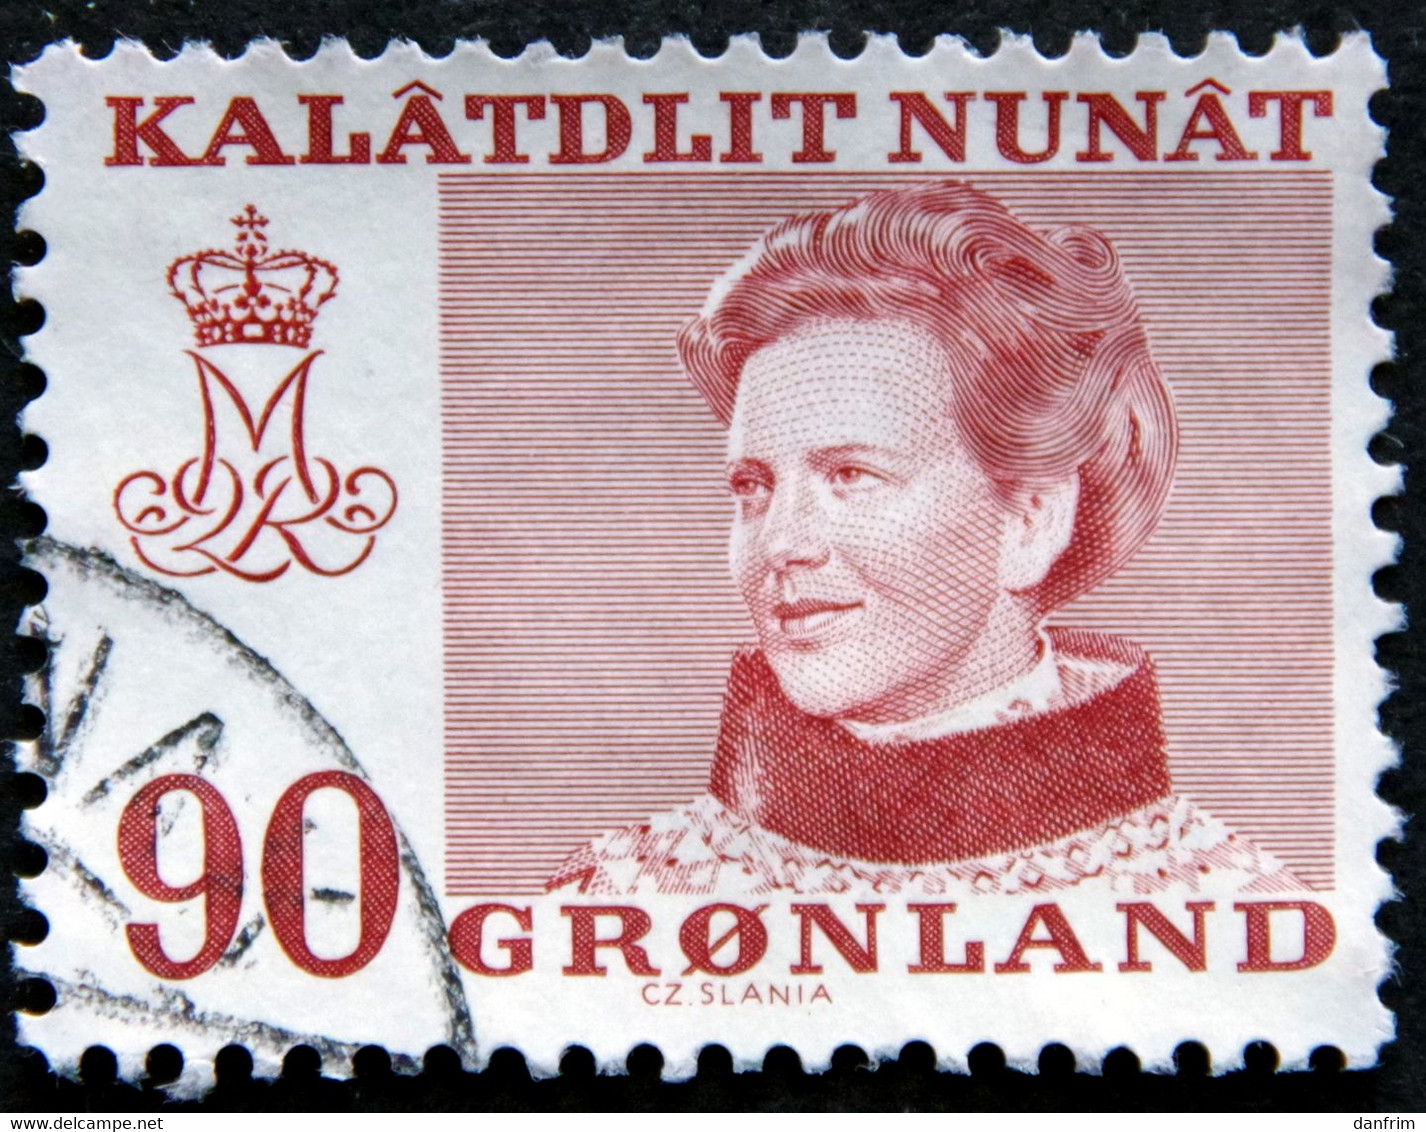 Greenland 1974  Queen Margrethe II   MiNr.90   ( Lot H 865  ) - Usados